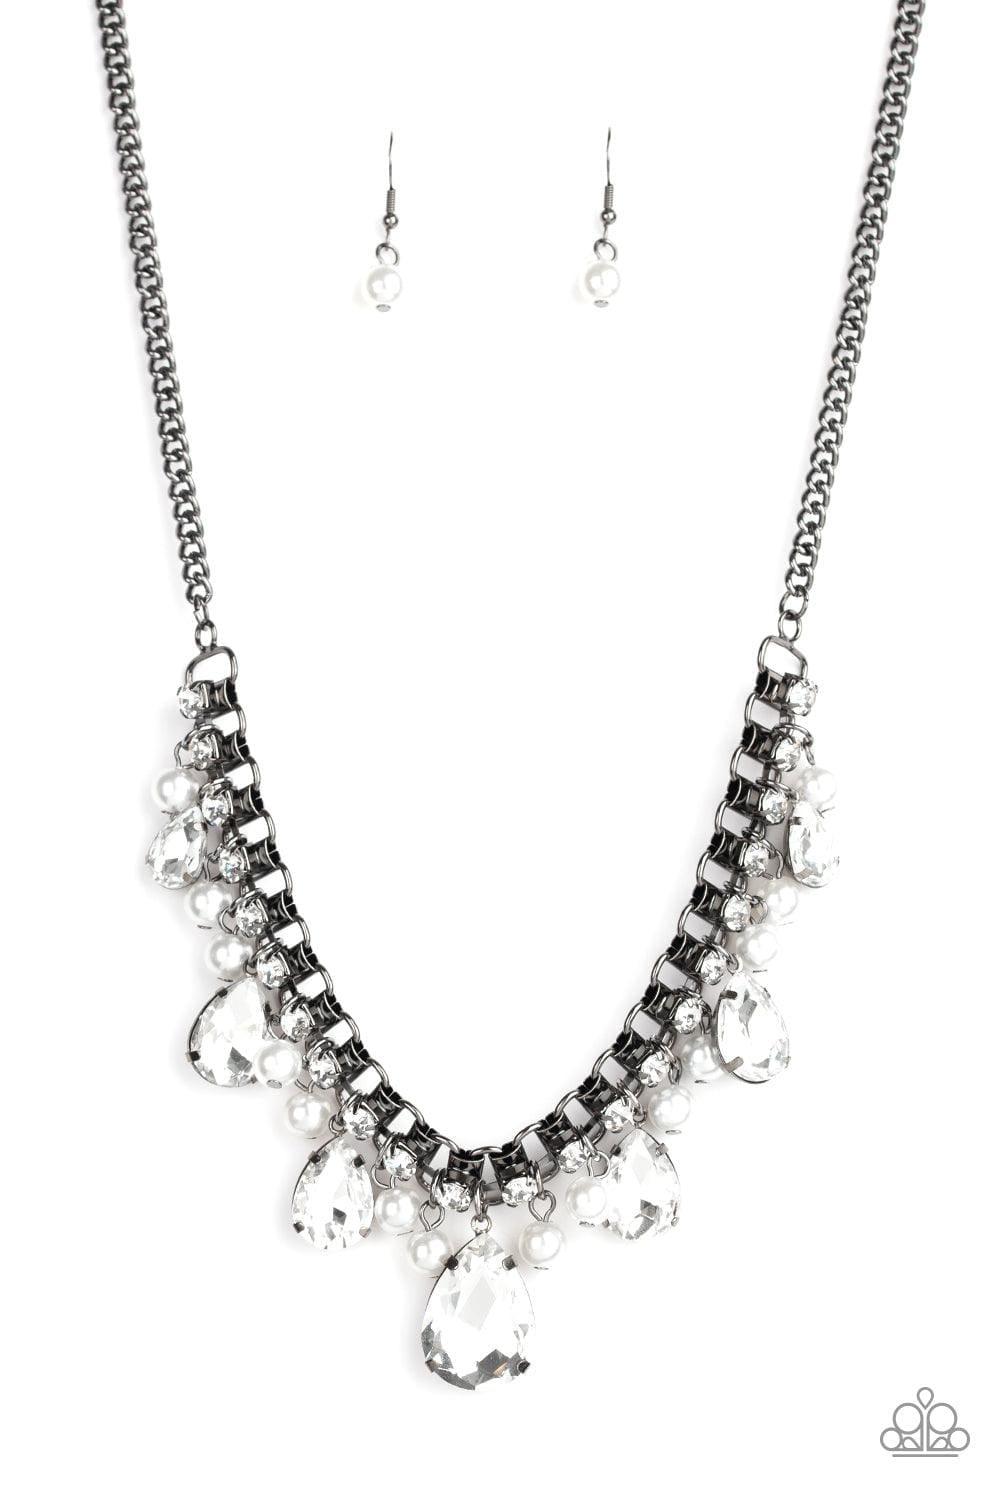 Paparazzi Accessories - Knockout Queen - Black Necklace - Bling by JessieK